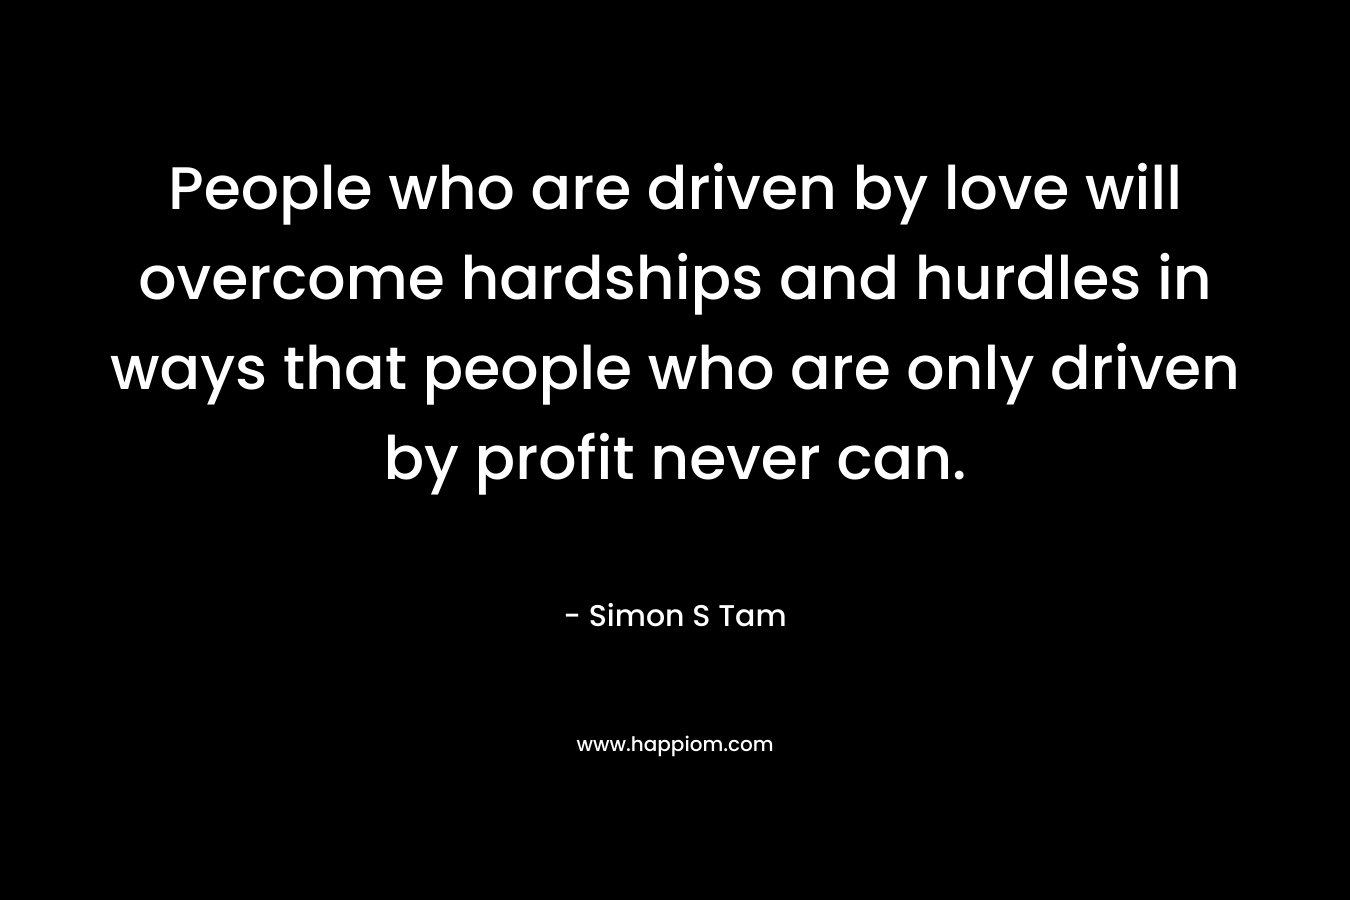 People who are driven by love will overcome hardships and hurdles in ways that people who are only driven by profit never can. – Simon S Tam